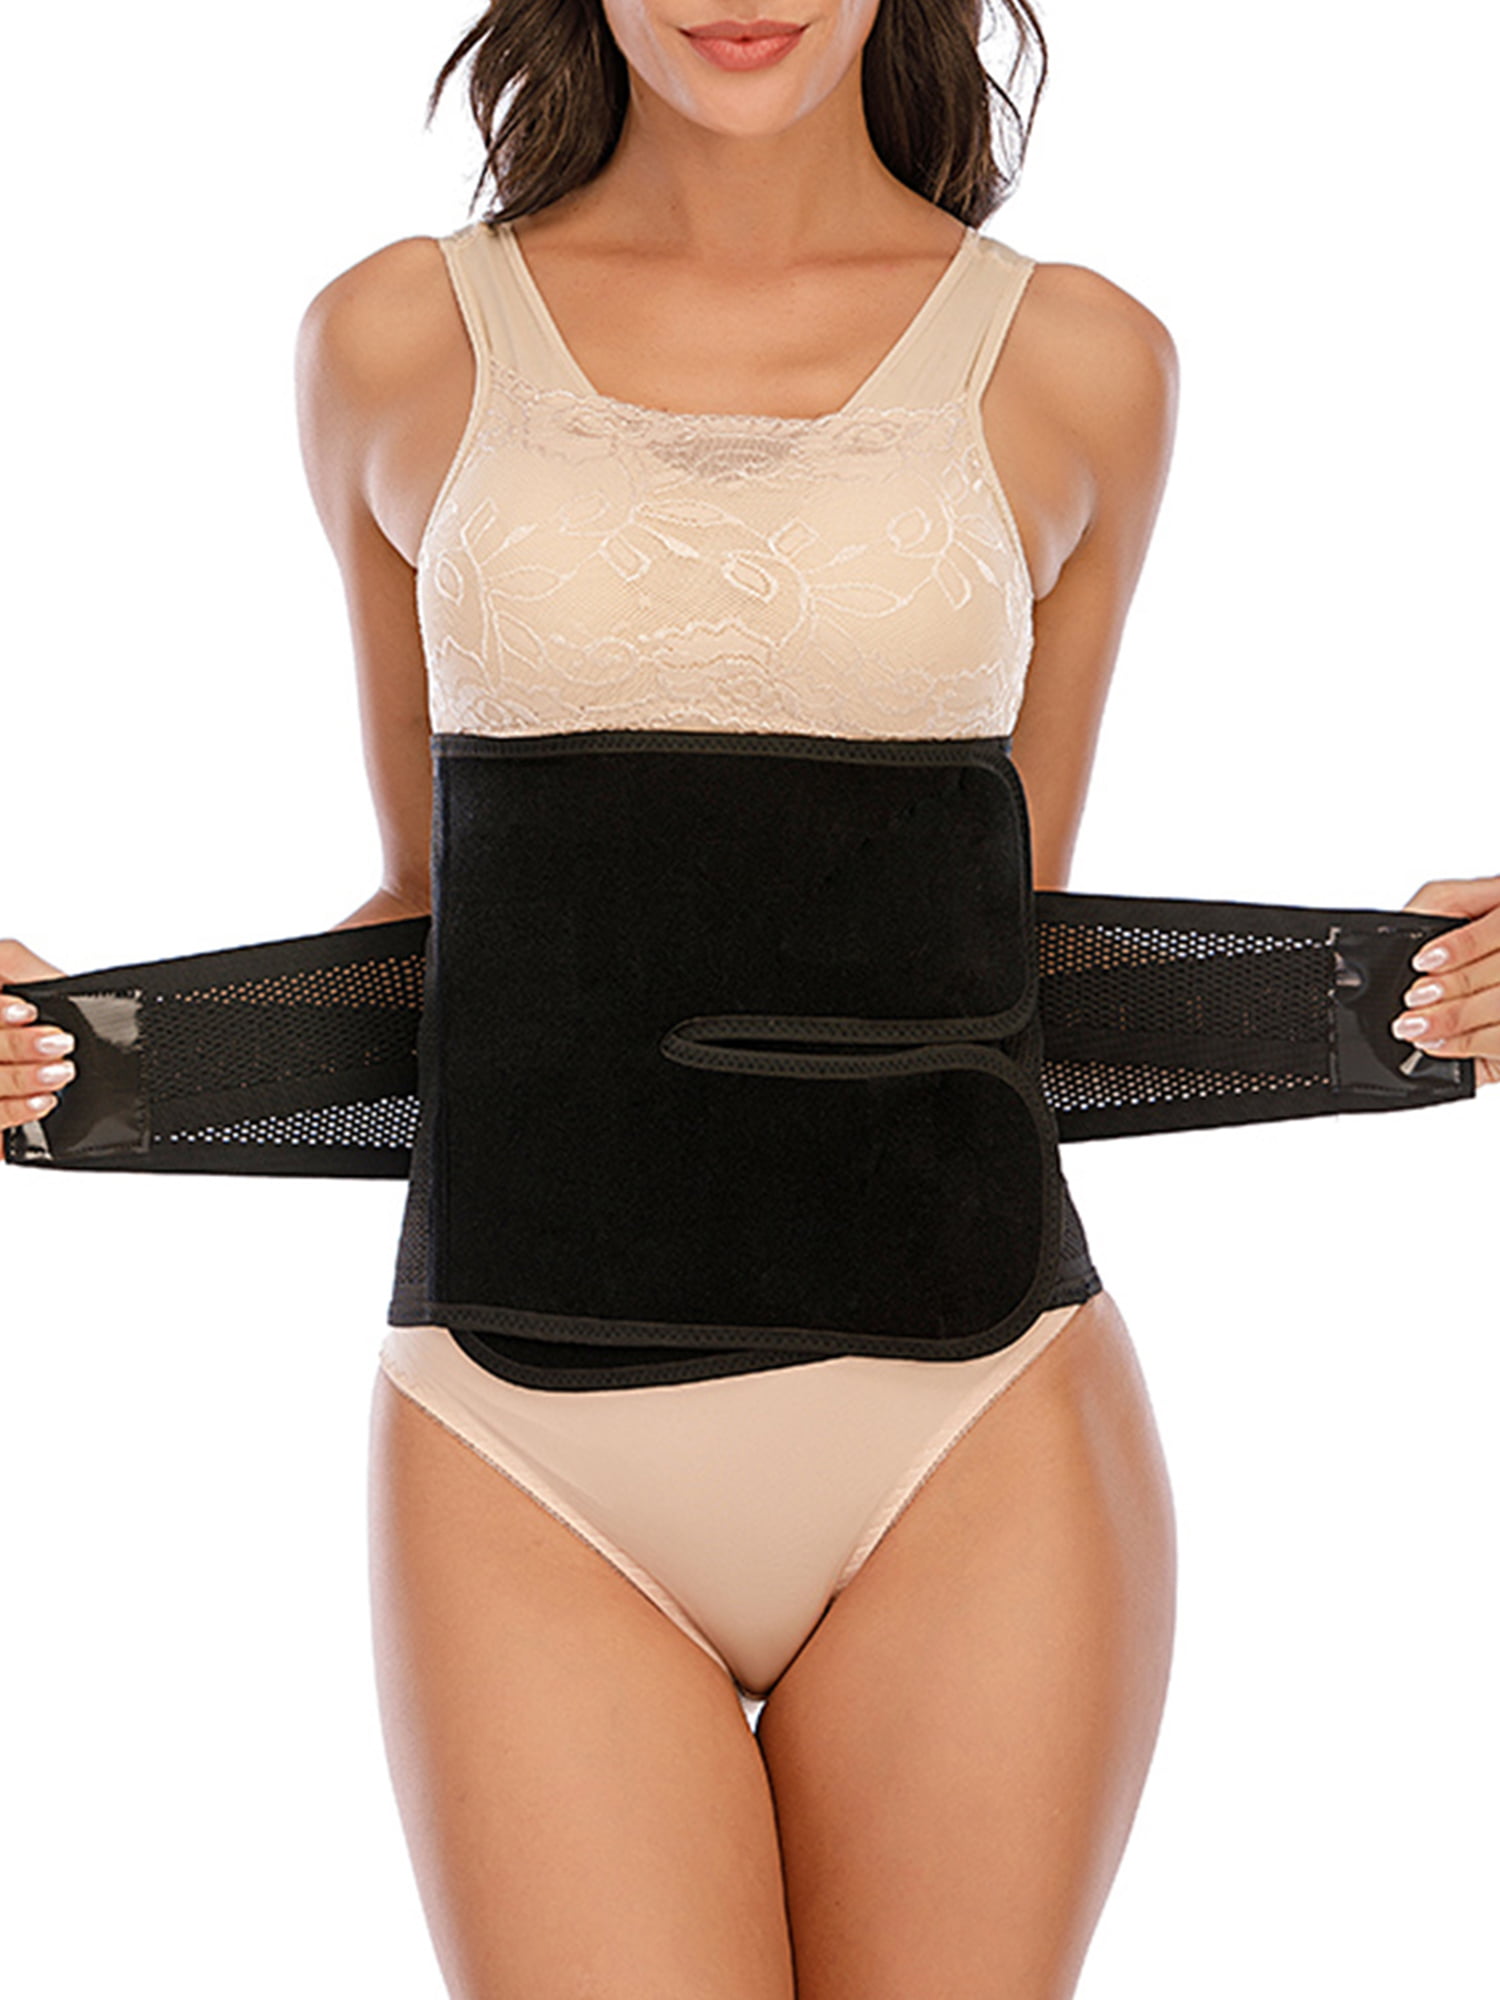 Postpartum Recovery Belly Waist Tummy Belt Shaper Body Support 5 Sizes HiQuality